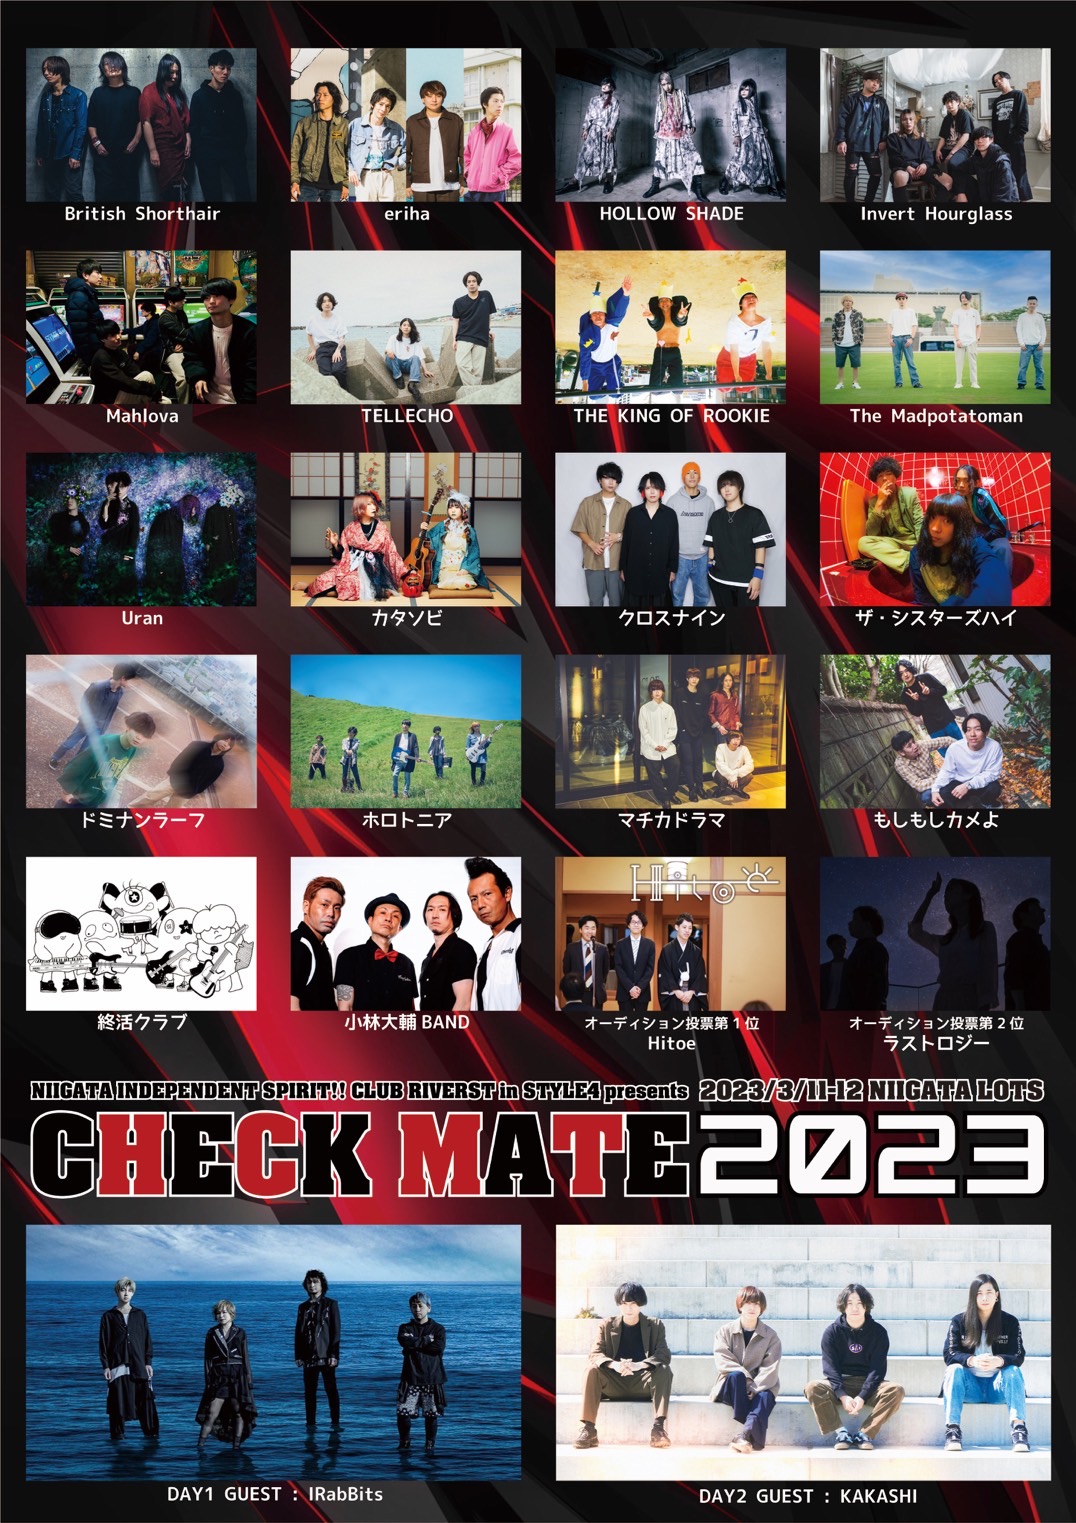 STYLE4 presents 【CHECK MATE 2023】